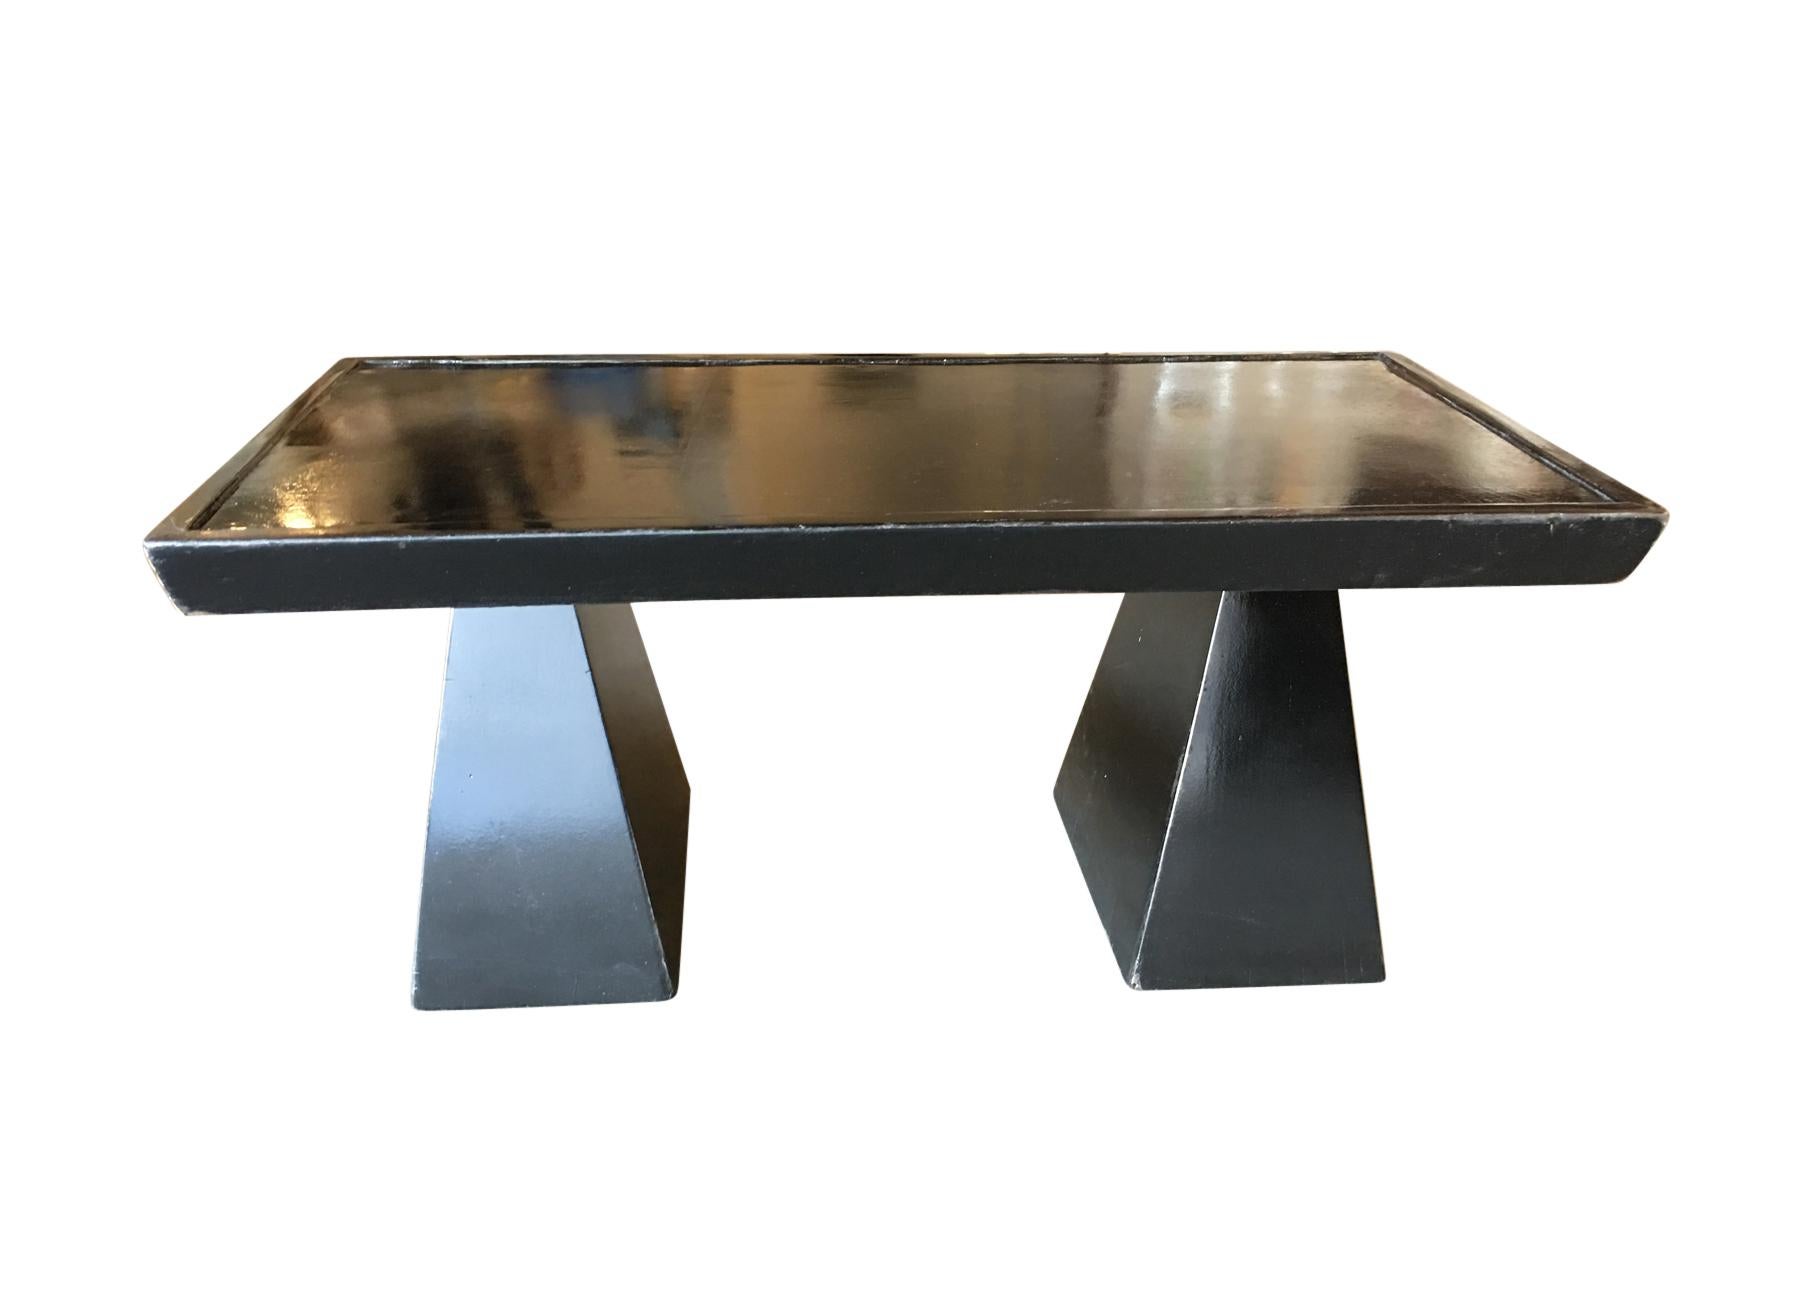 A rare find from the 1950s, this original black lacquer coffee table boasts a Cubist-inspired geometric design. Crafted by renowned designer Gail Fury, its sculptural form and lipped tabletop exemplify mid-century elegance. A unique piece blending